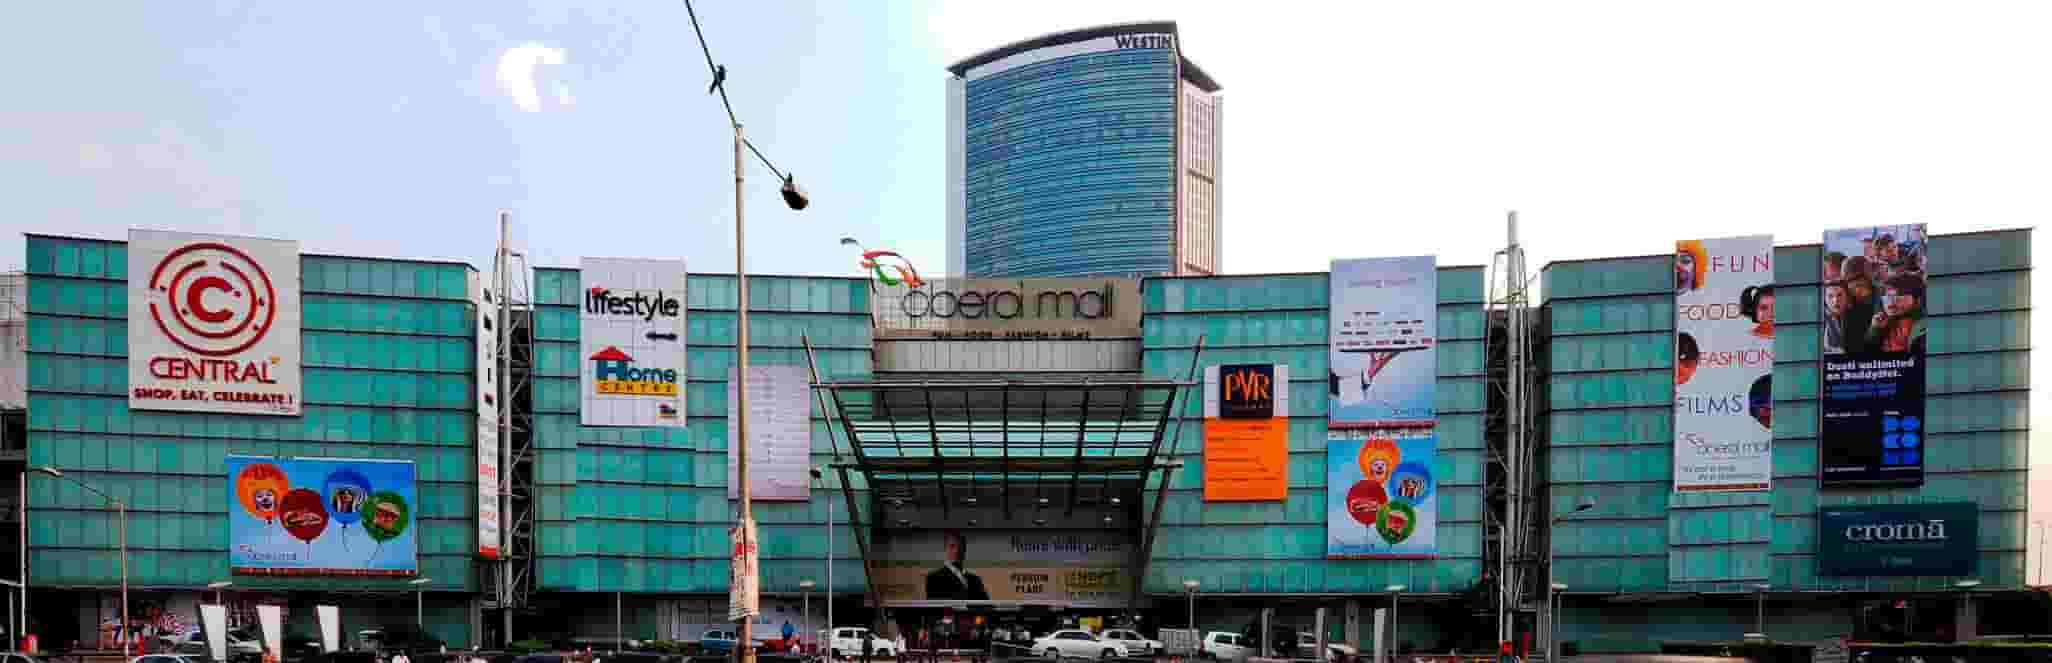 oberoi-mall-best-mall-in-mumbai-for-shopping-food-entertainment